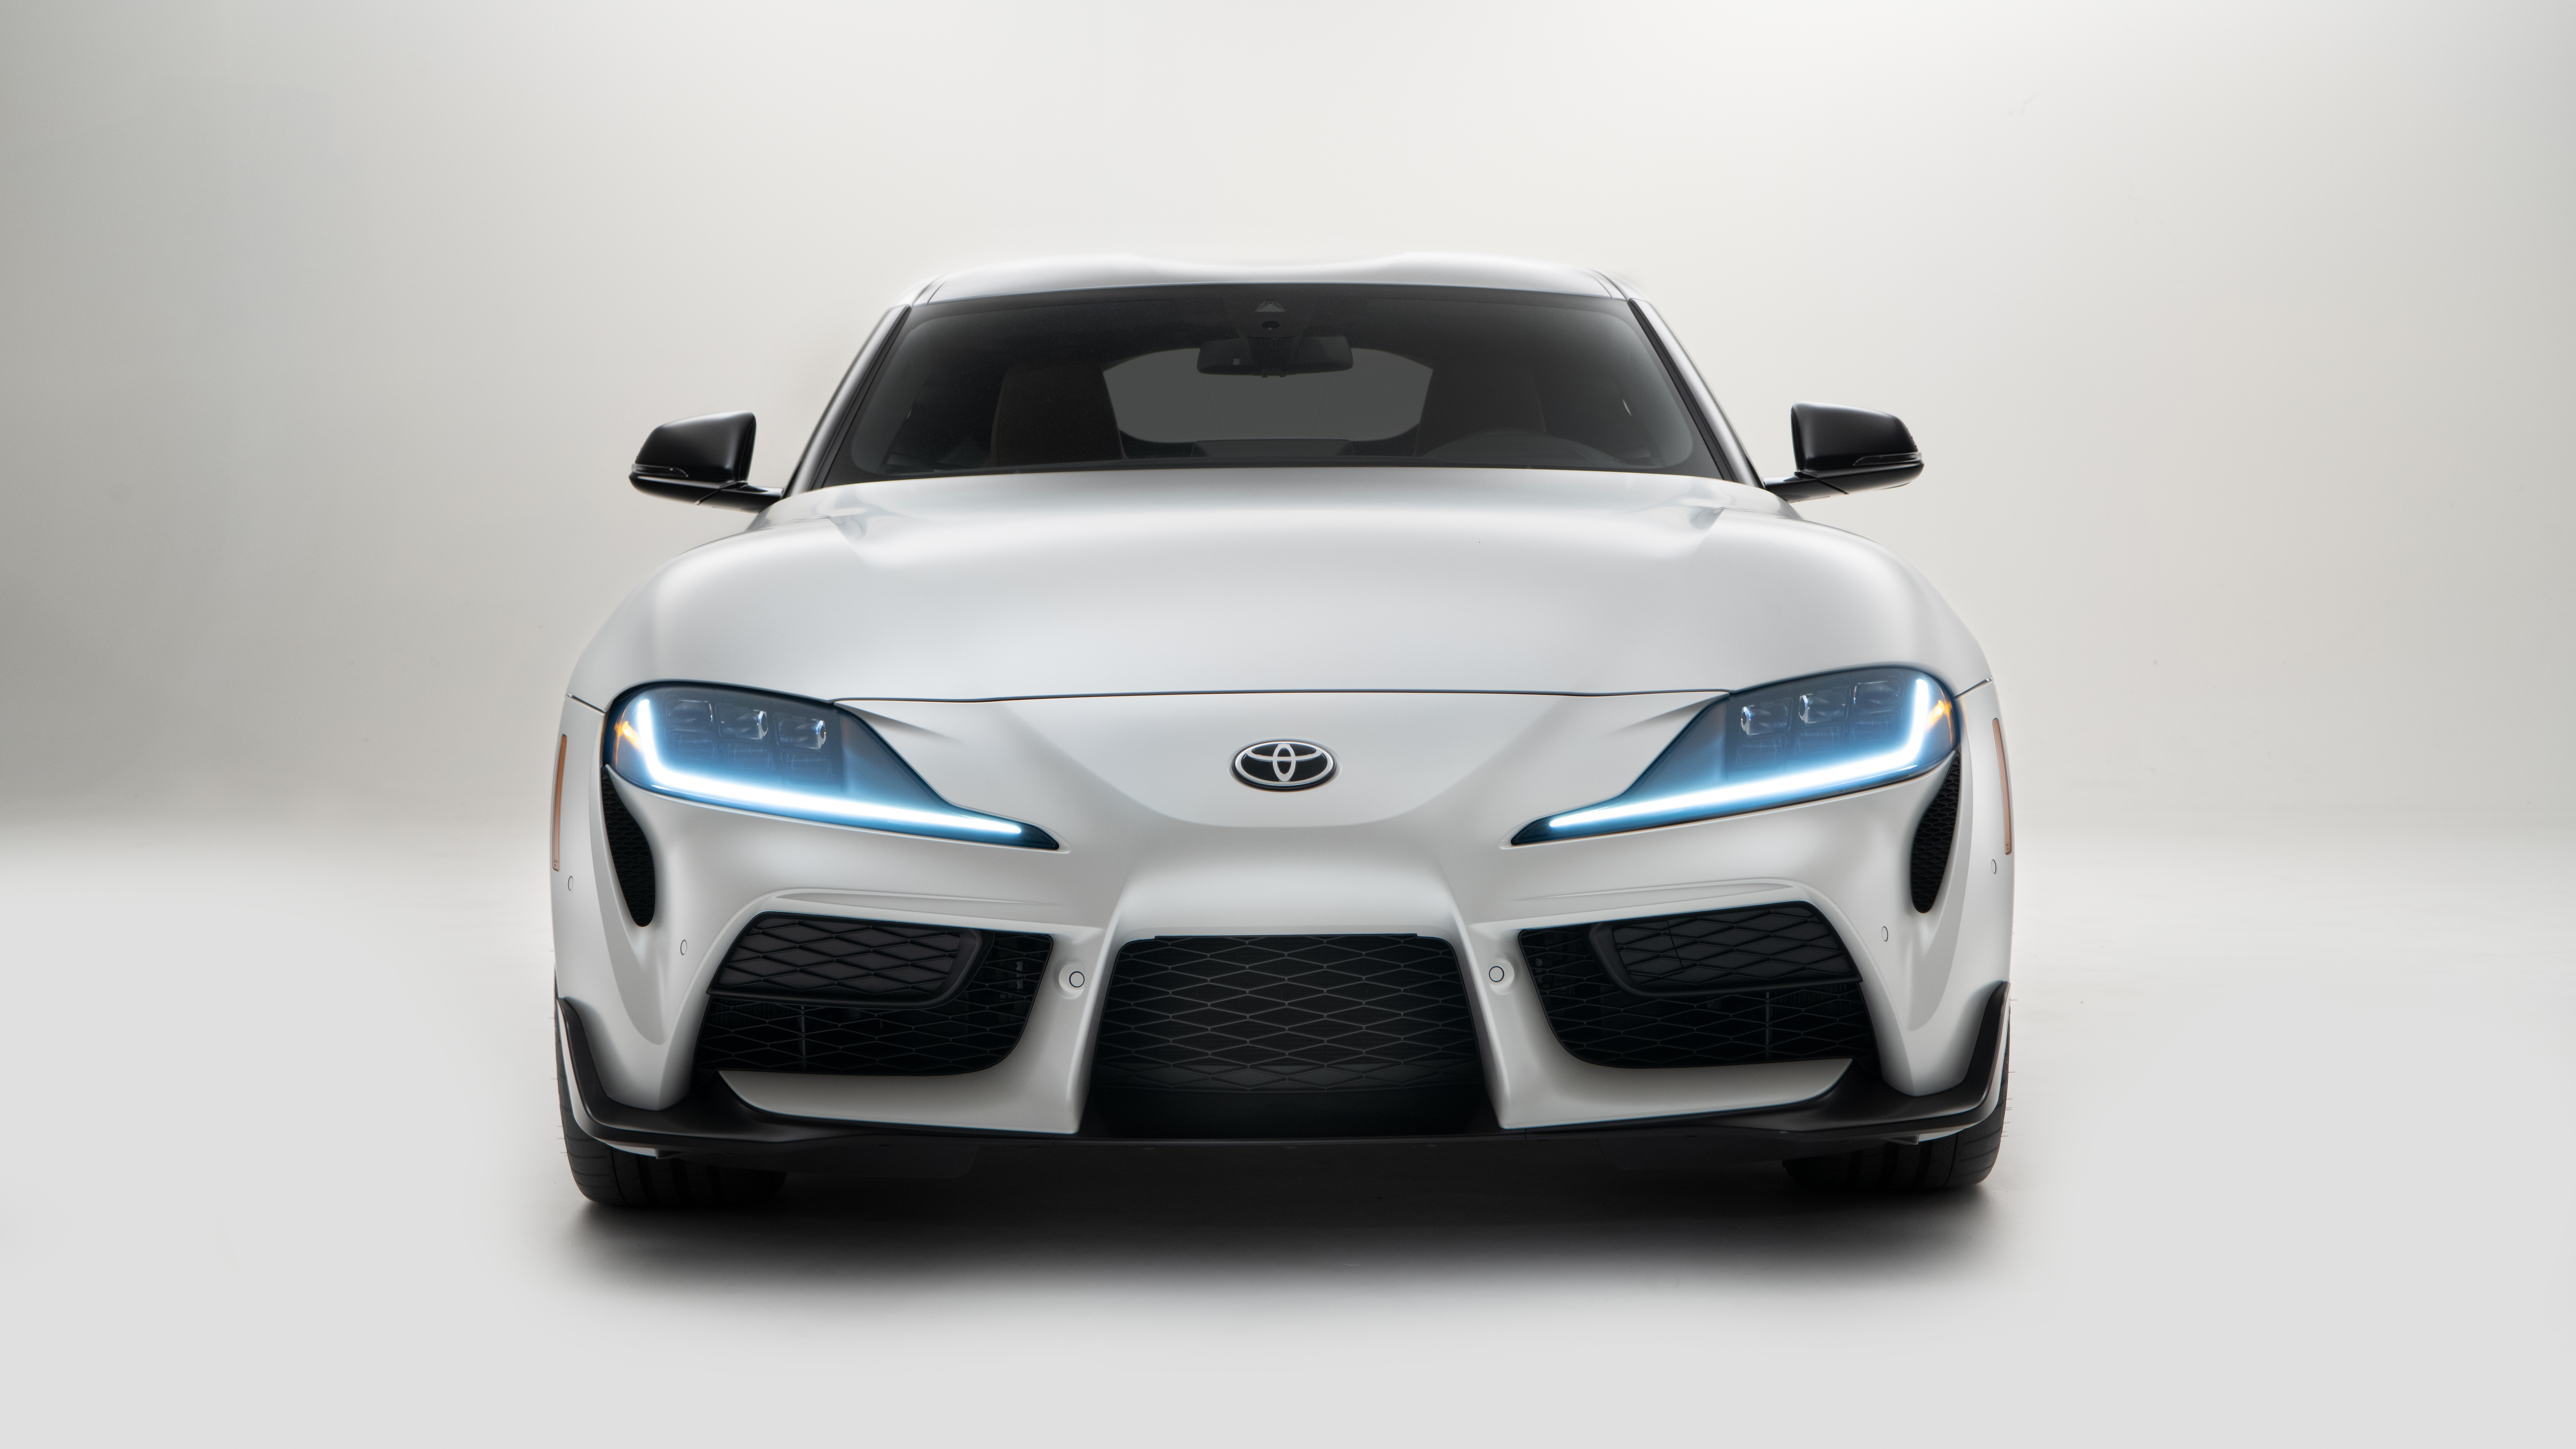 1080x1920  1080x1920 toyota supra need for speed games hd cars for  Iphone 6 7 8 wallpaper  Coolwallpapersme